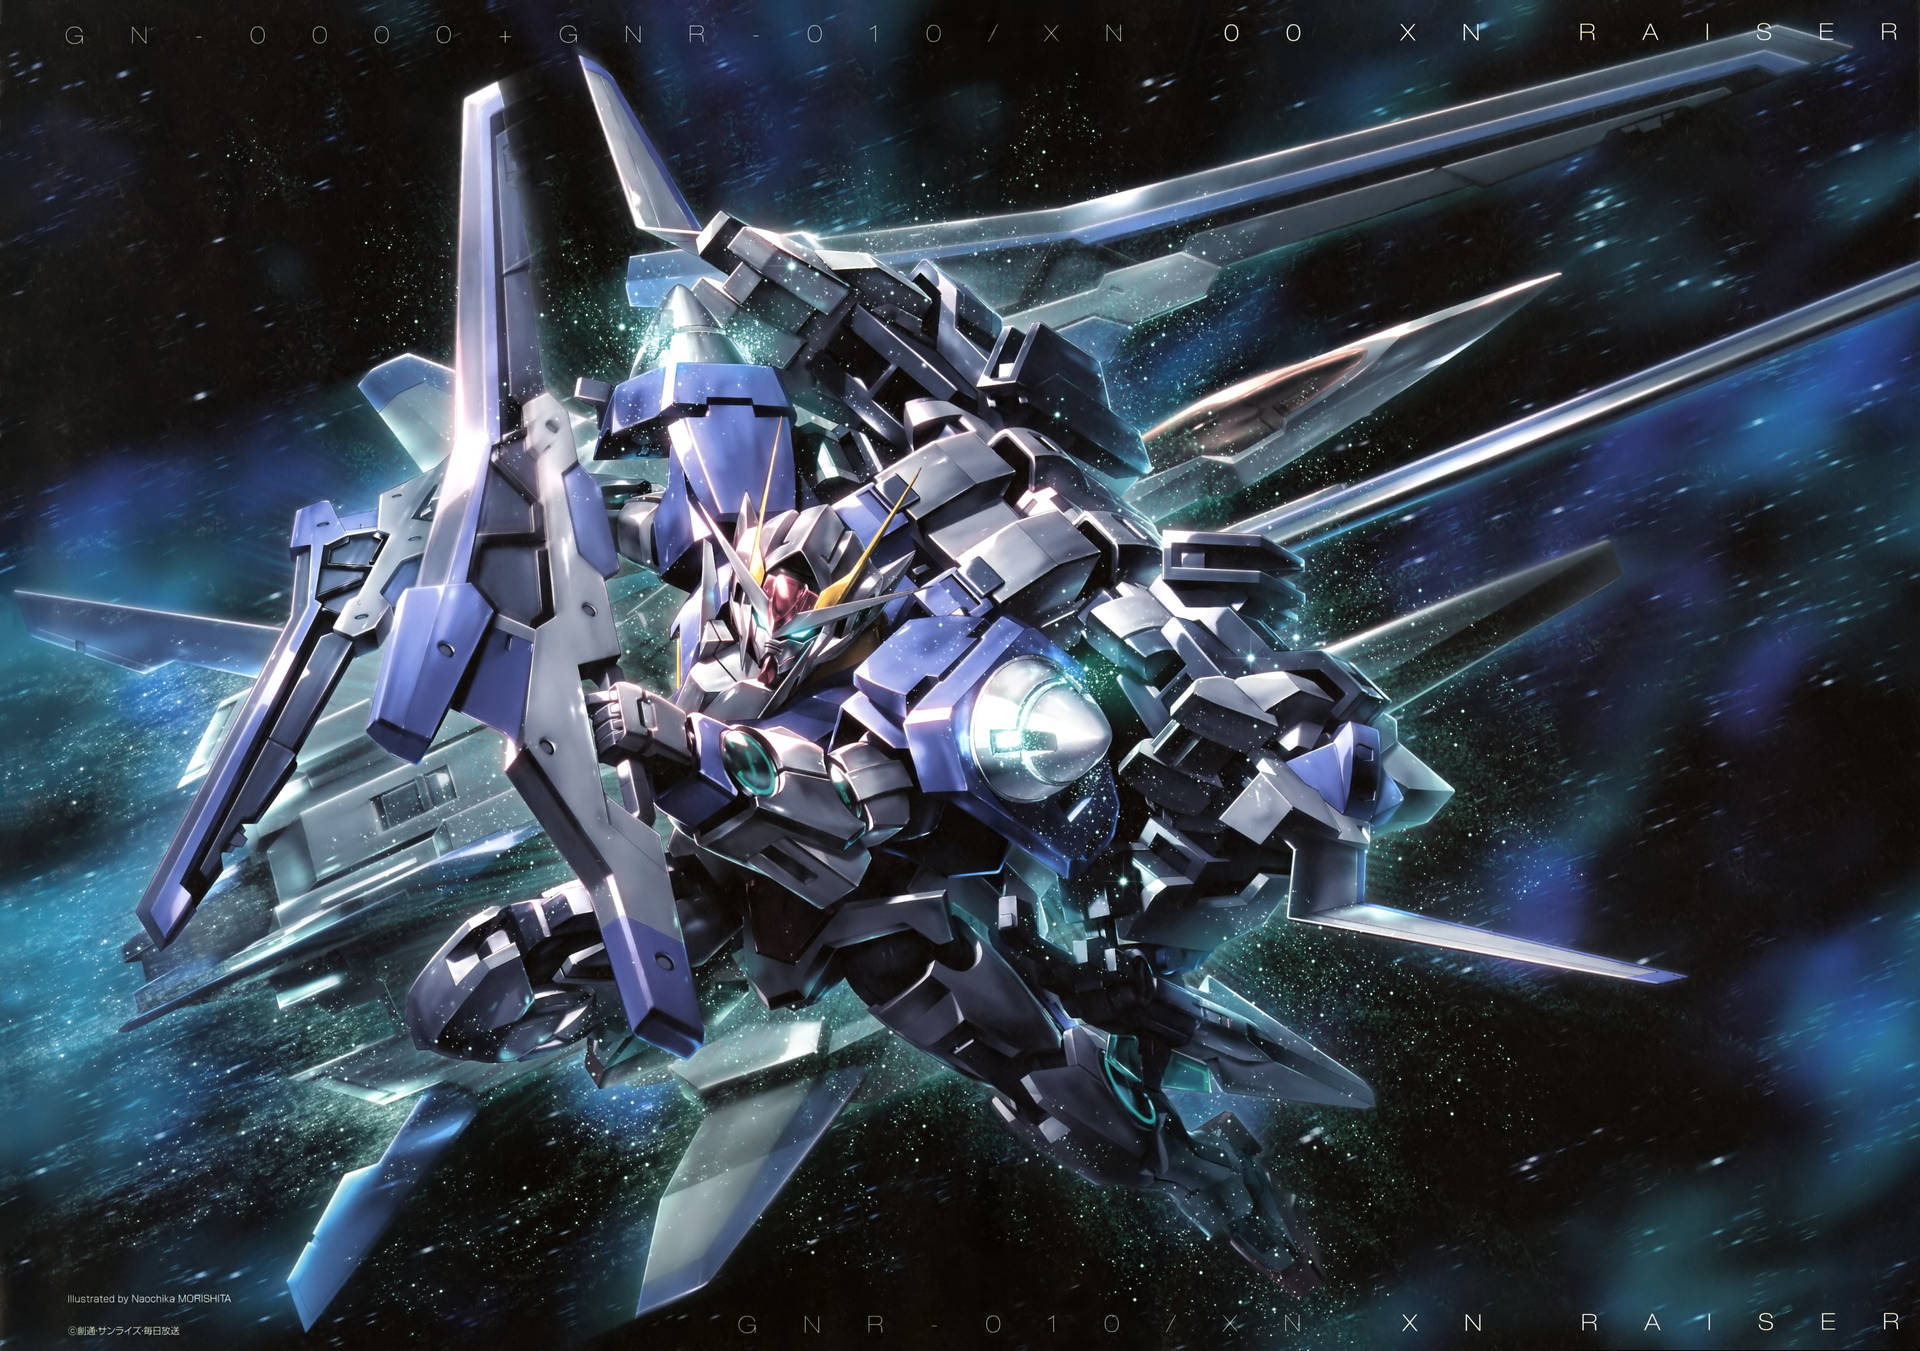 Witness the power of Mobile Suit Gundam in this intense battle Wallpaper